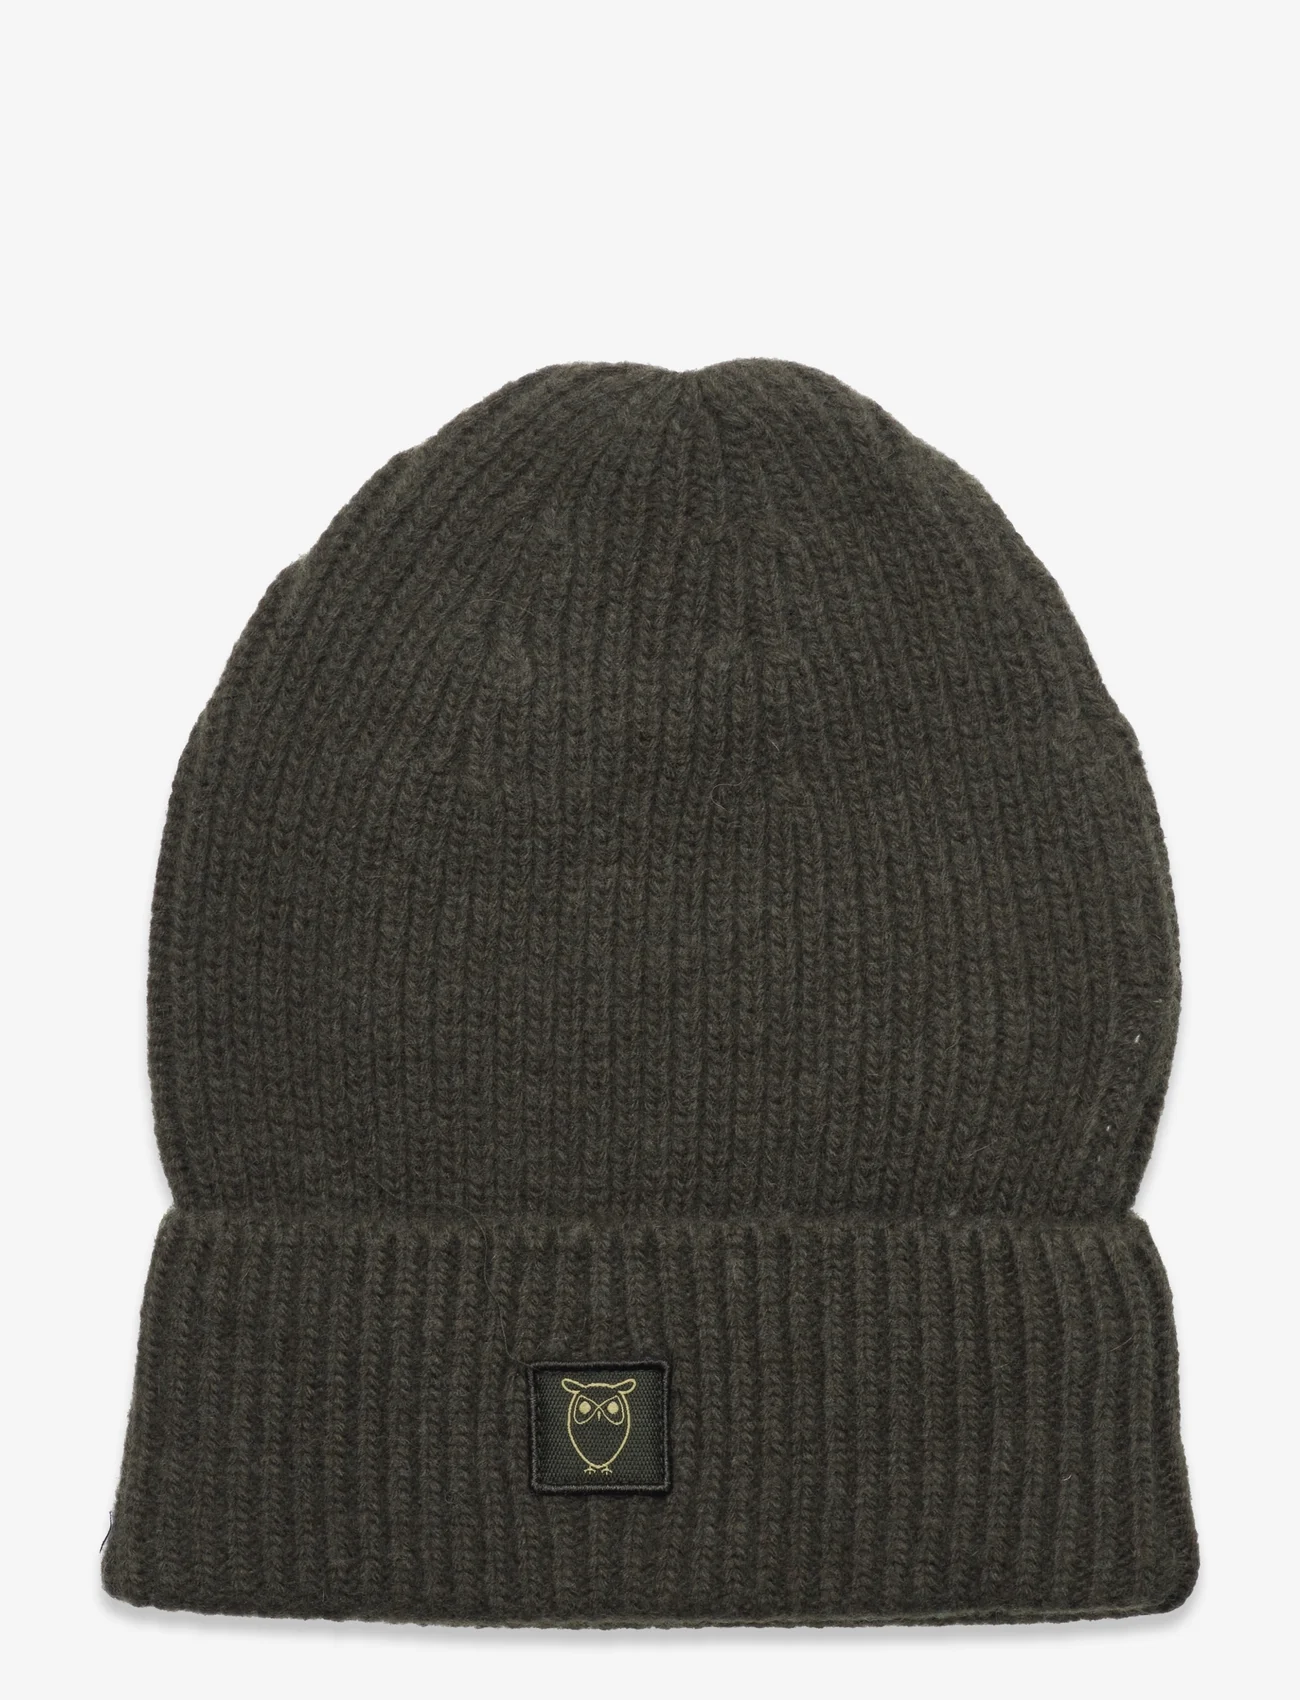 Knowledge Cotton Apparel - High wool beanie - RWS - lowest prices - forrest night - 0